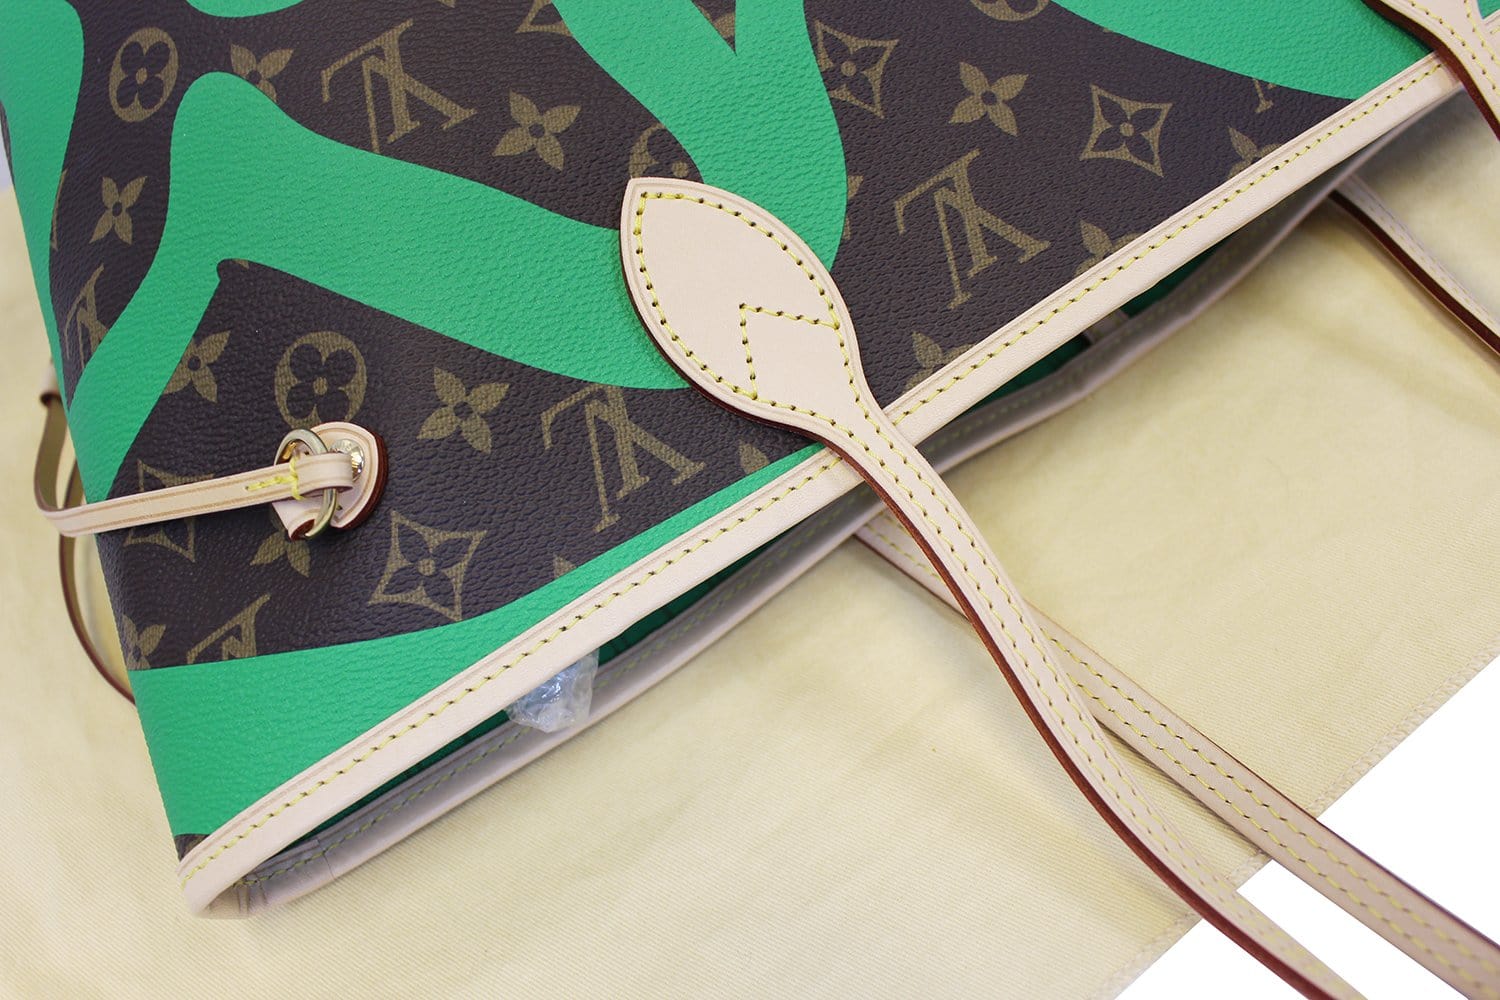 Louis Vuitton Limited Edition Turquoise Monogram V Neverfull MM